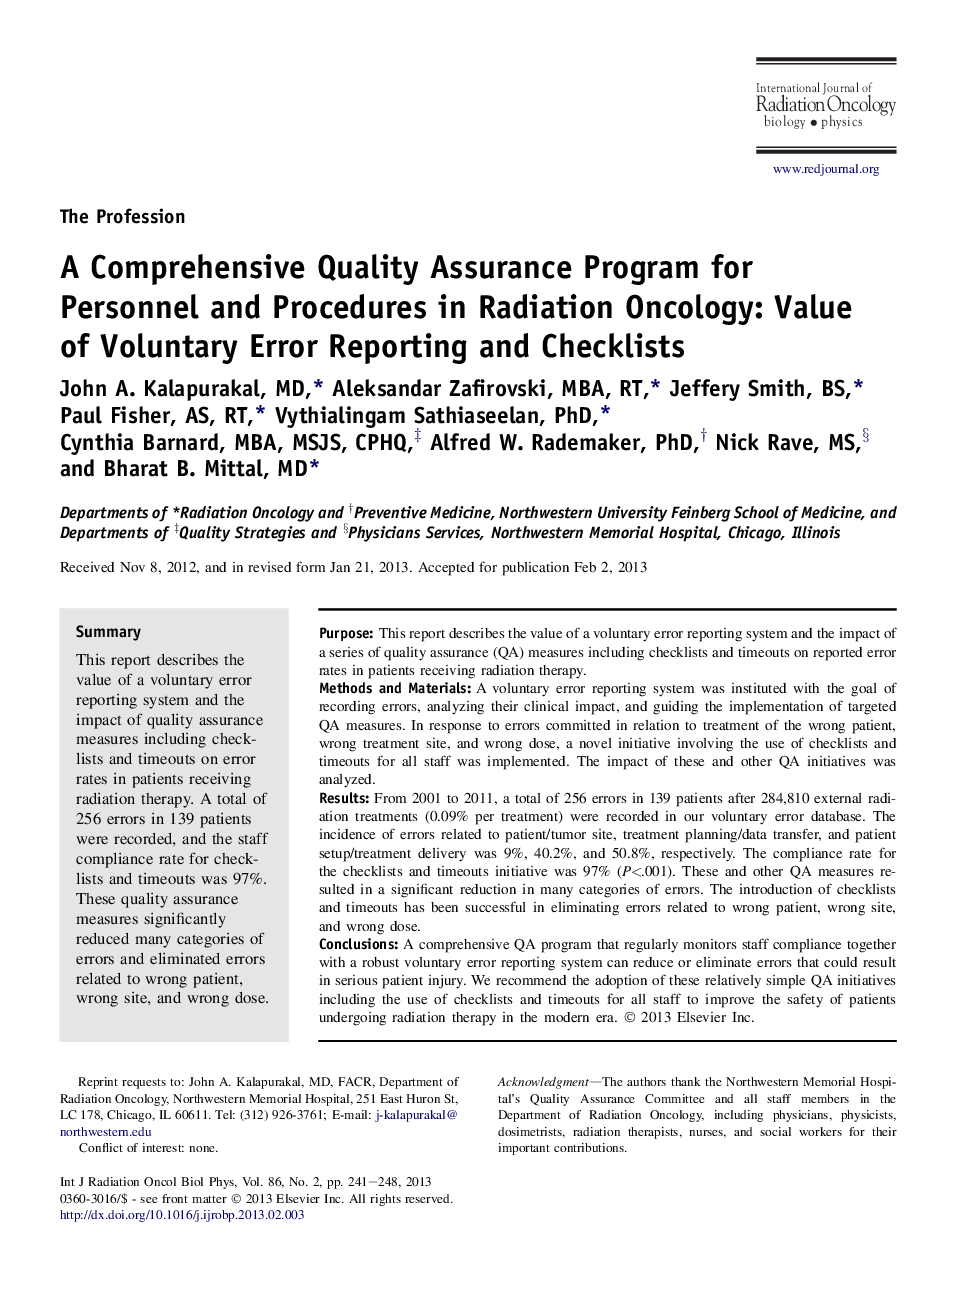 A Comprehensive Quality Assurance Program for Personnel and Procedures in Radiation Oncology: Value ofÂ Voluntary Error Reporting and Checklists